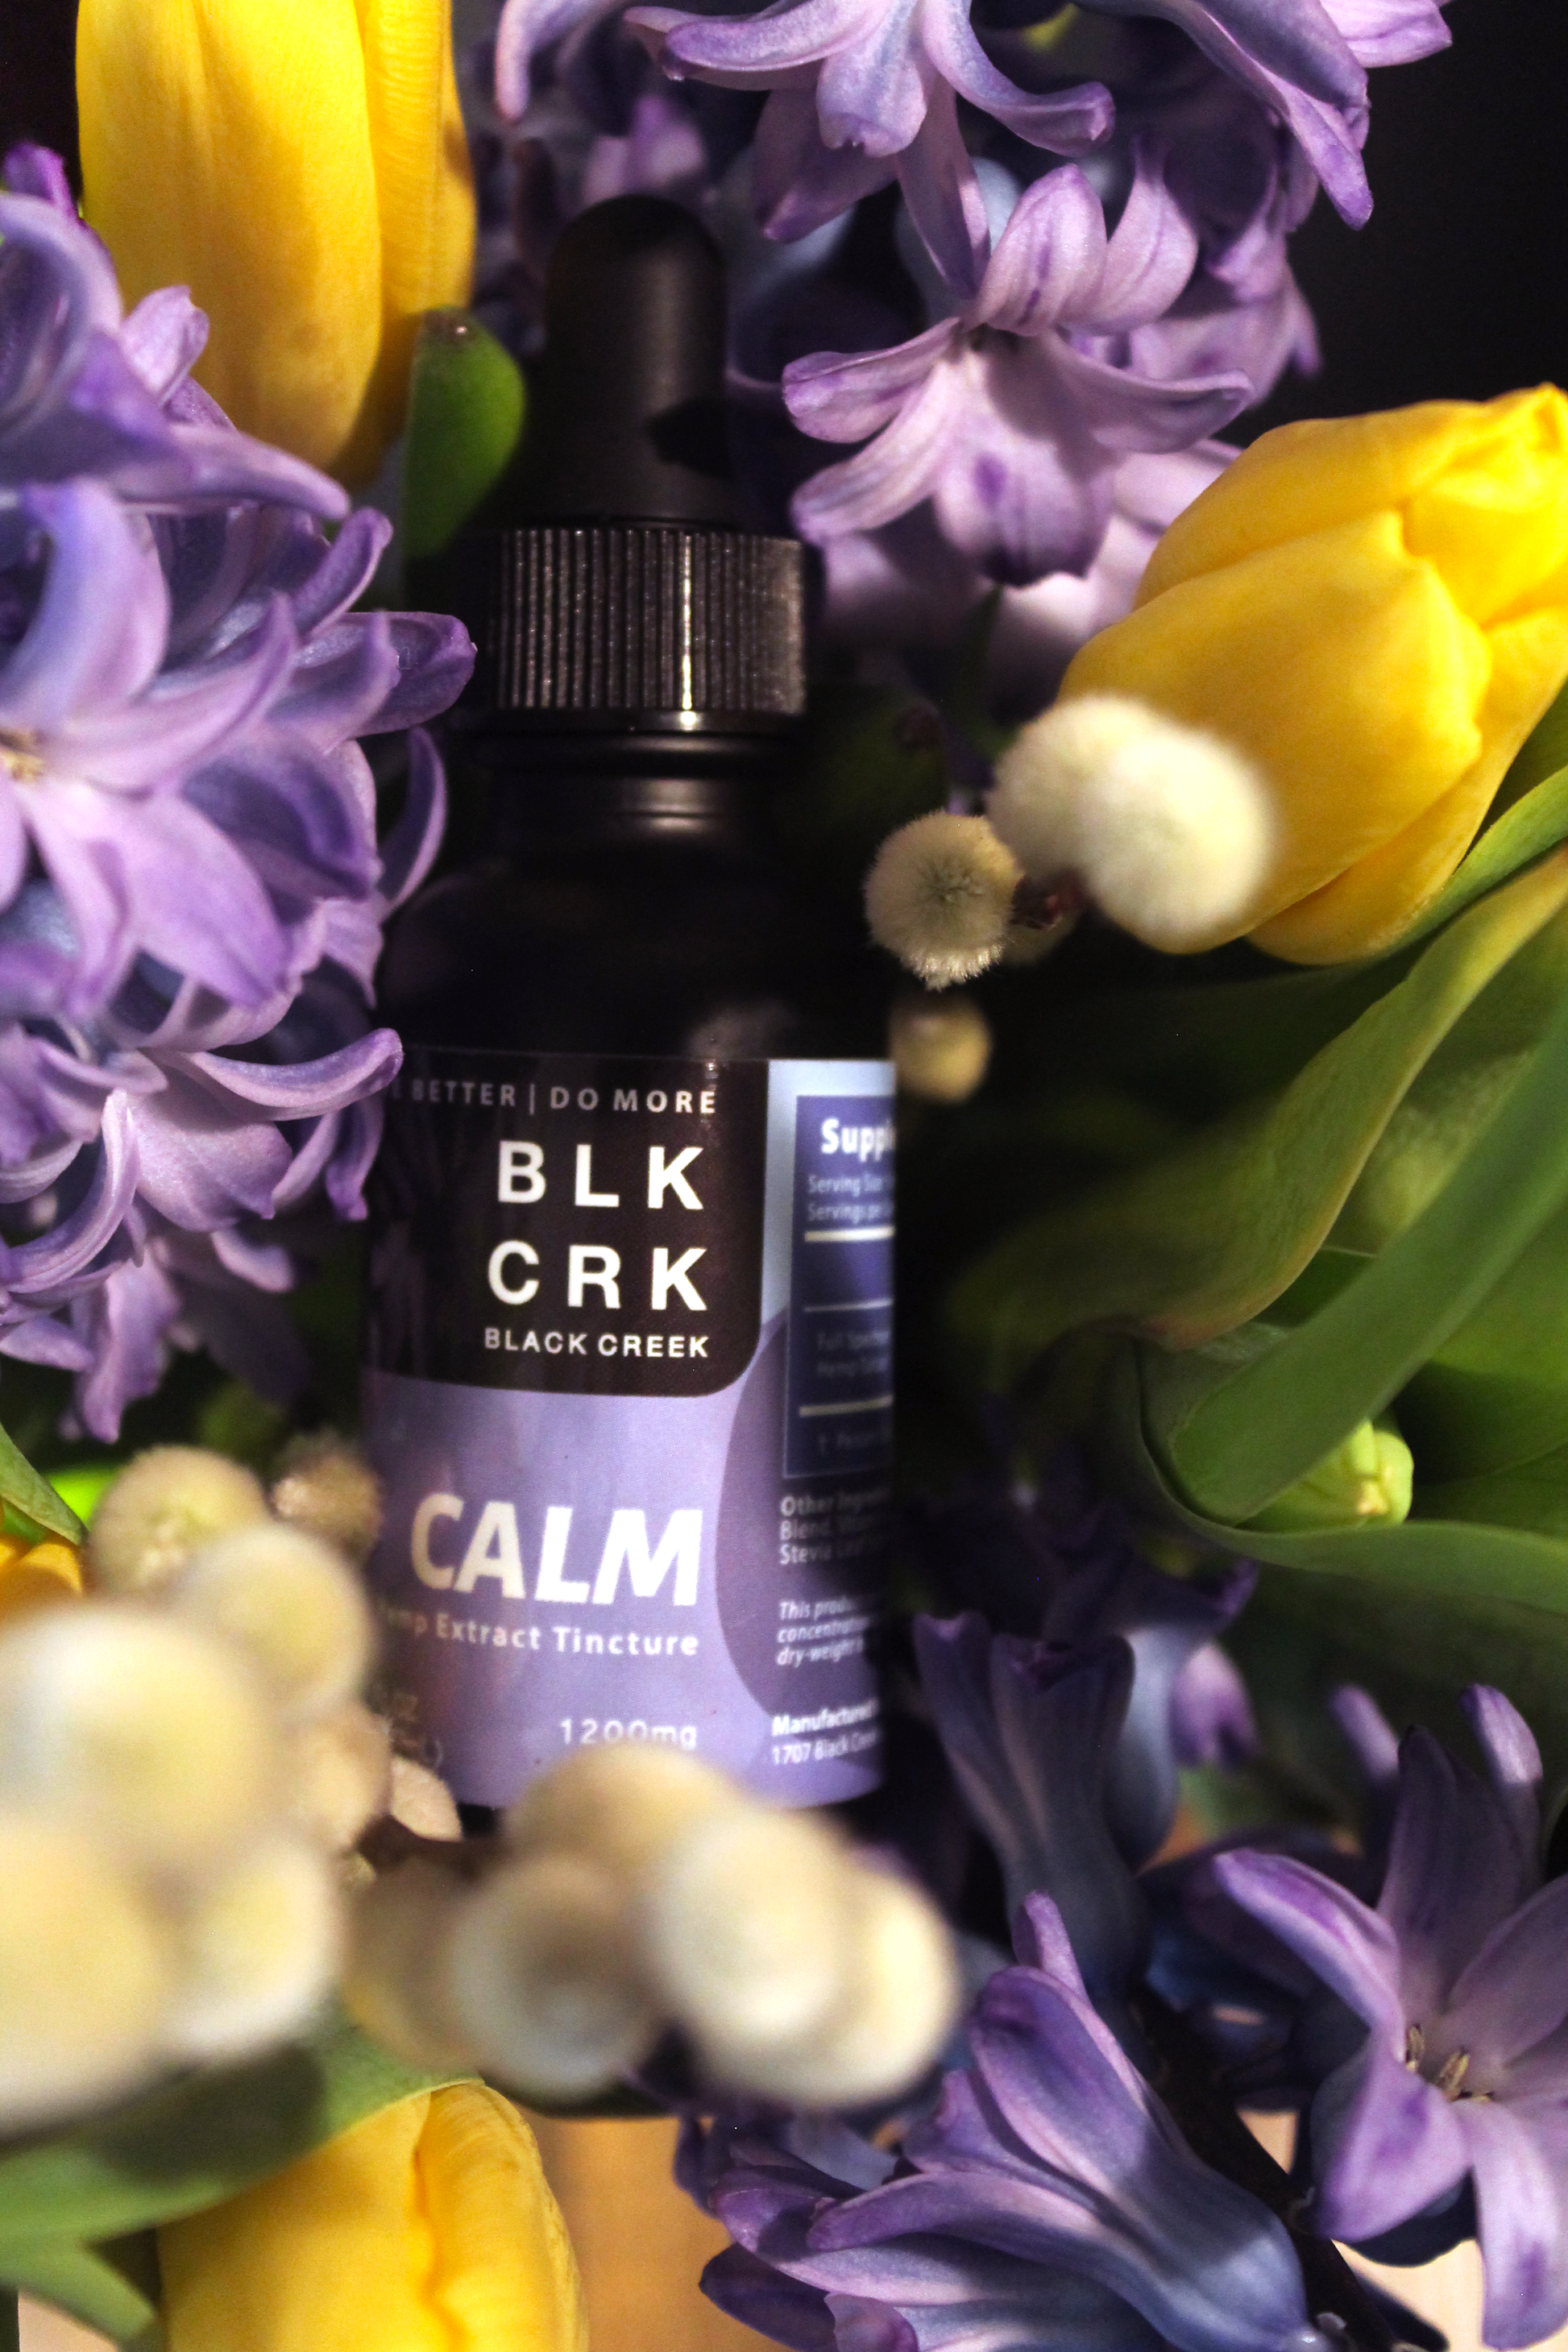 A Black Creek CBD Calm Tincture resting in a bouquet of purple , yellow, and white flowers